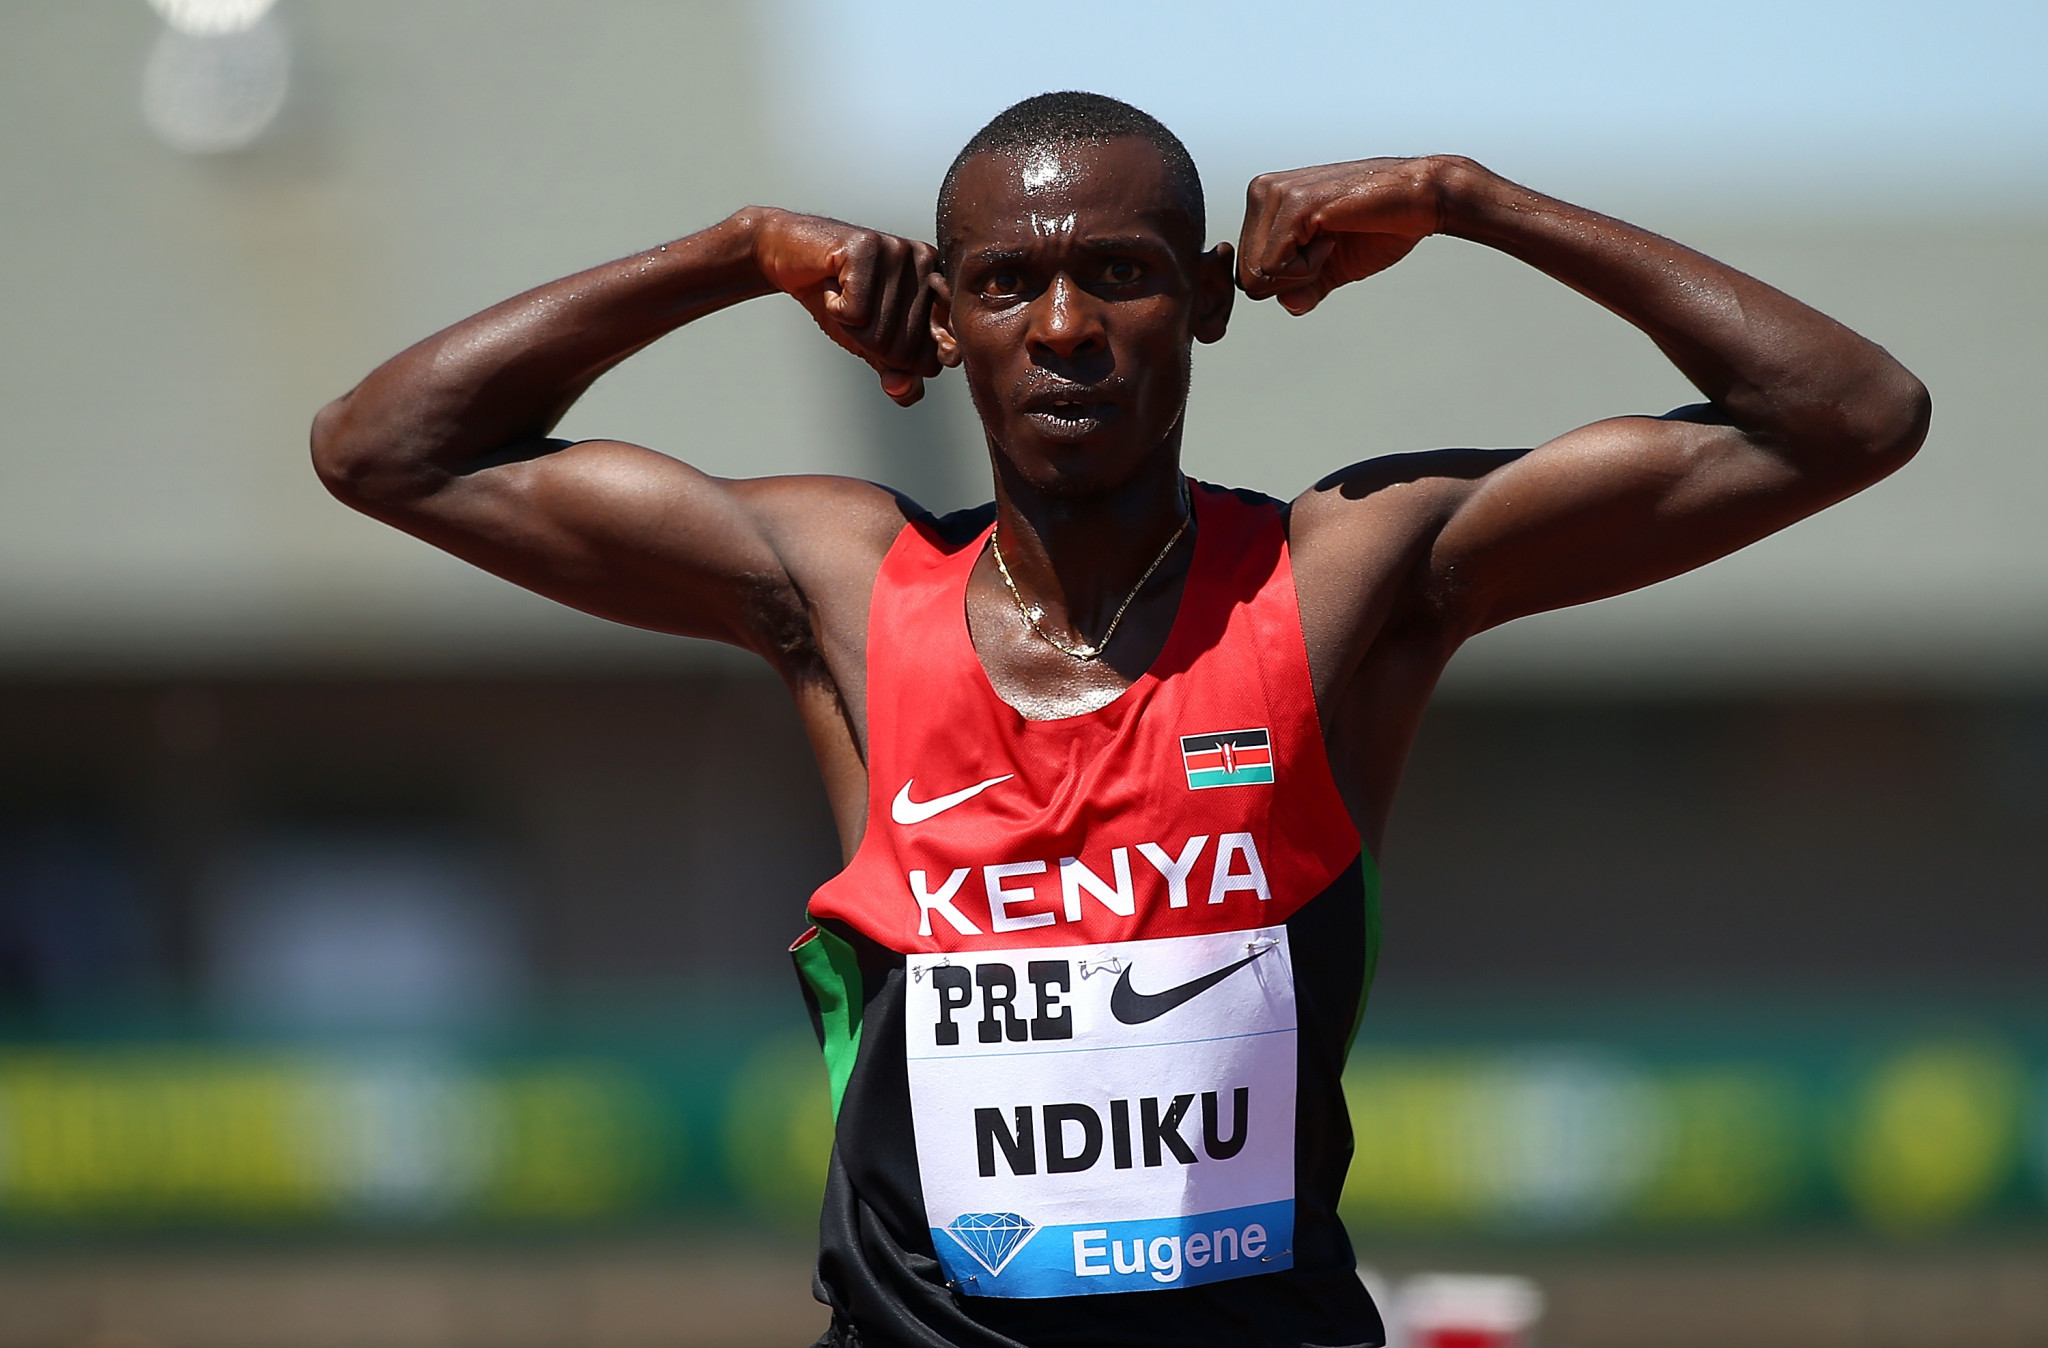 David Okeyo was found to have siphoned off funds from a sponsorship deal between Nike and Athletics Kenya ©Getty Images